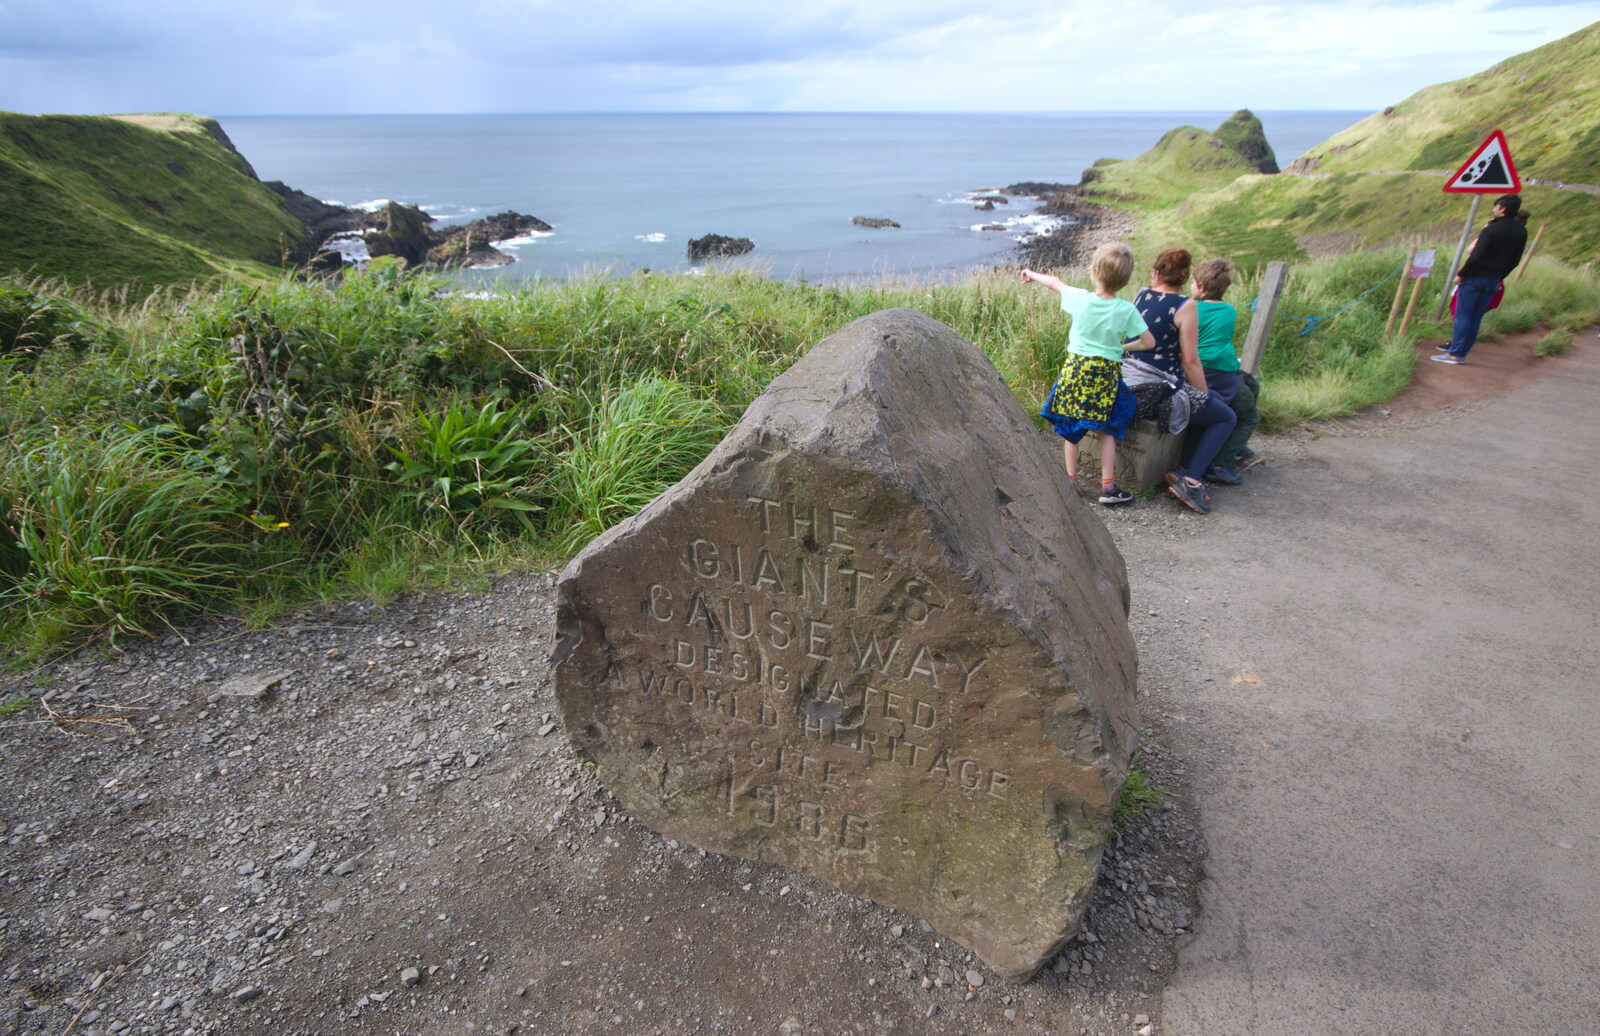 The boulder announcing World Heritage status from The Giant's Causeway, Bushmills, County Antrim, Northern Ireland - 14th August 2019